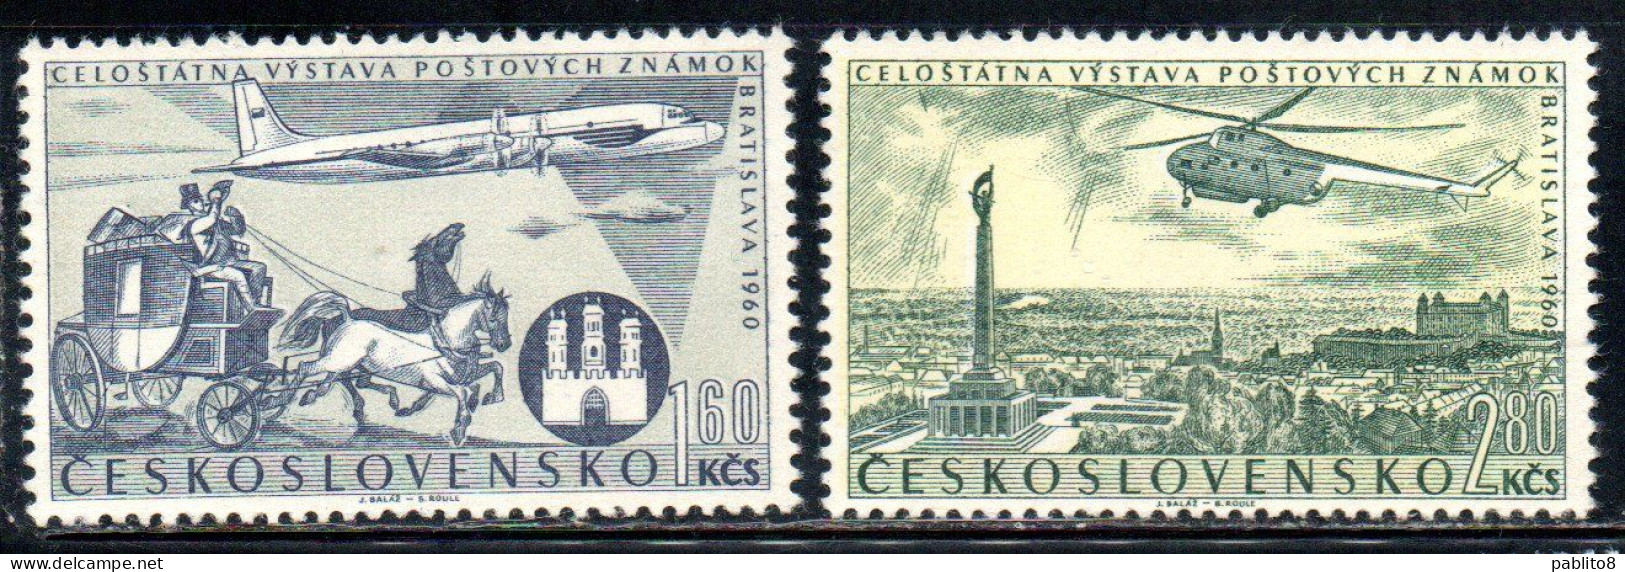 CZECHOSLOVAKIA CECOSLOVACCHIA 1960 AIR POST MAIL AIRMAIL NATIONAL STAMP EXHIBITION COMPLETE SET SERIE COMPLETA MNH - Poste Aérienne